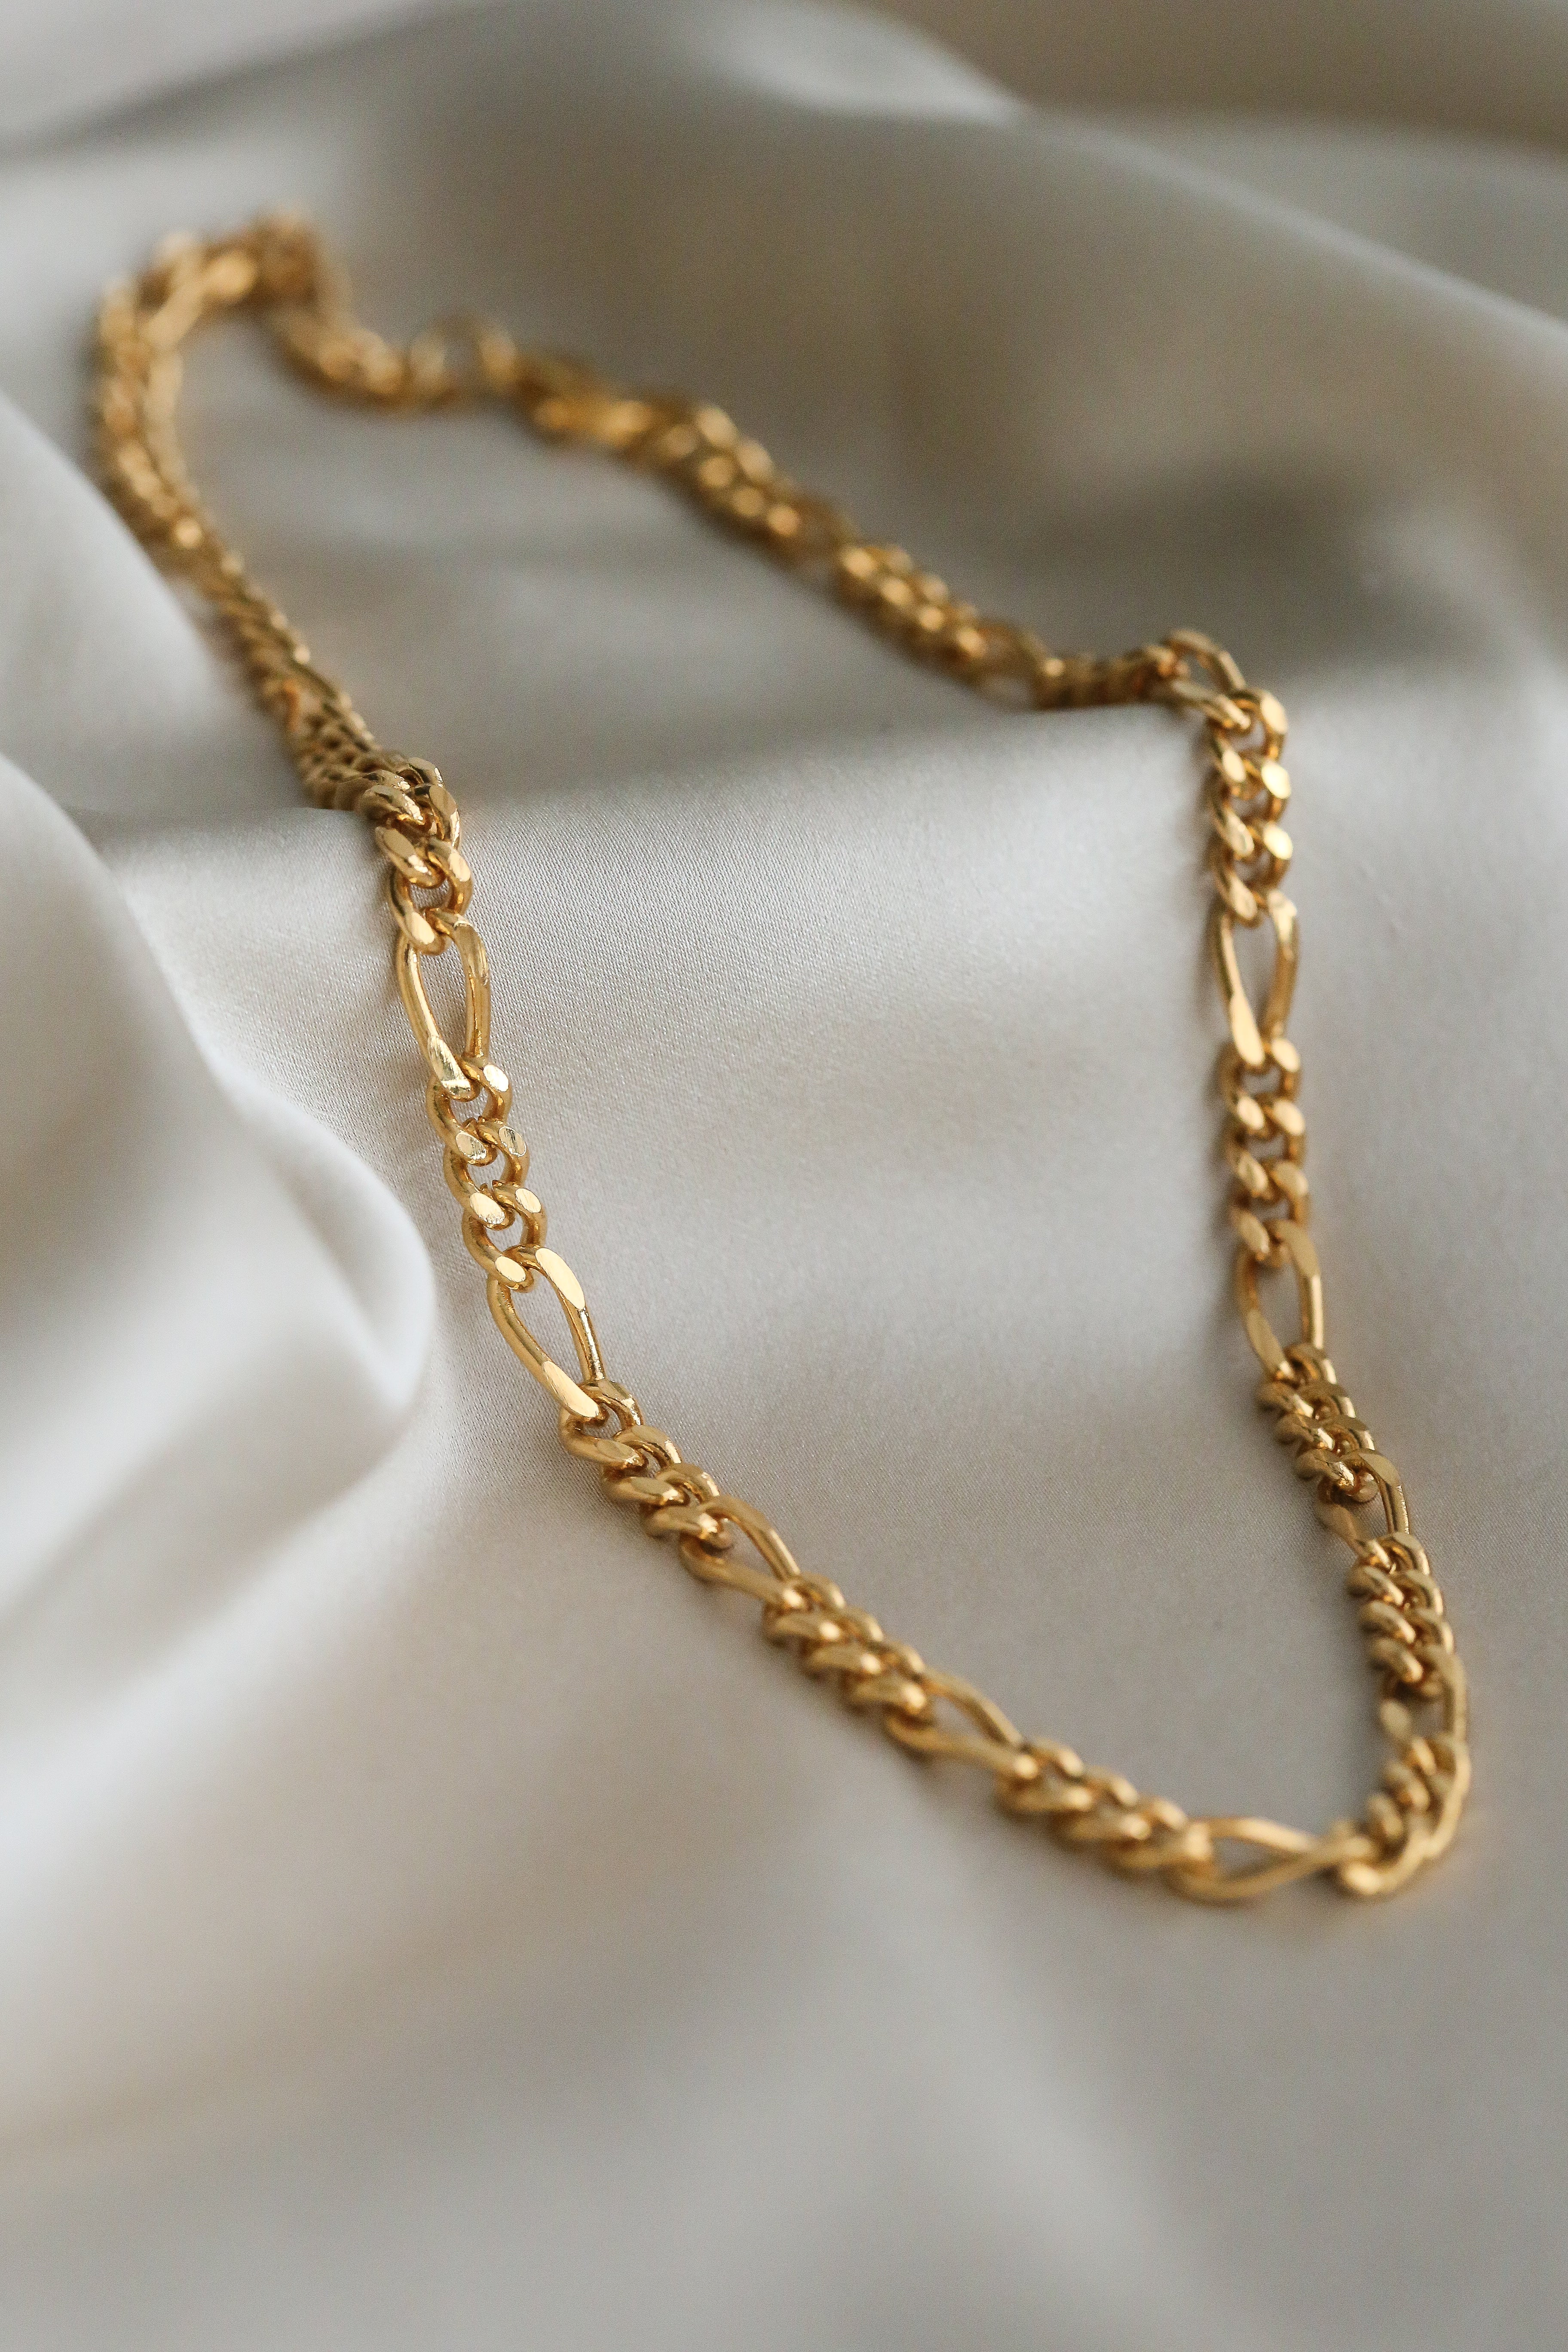 Justus Necklace - Boutique Minimaliste has waterproof, durable, elegant and vintage inspired jewelry